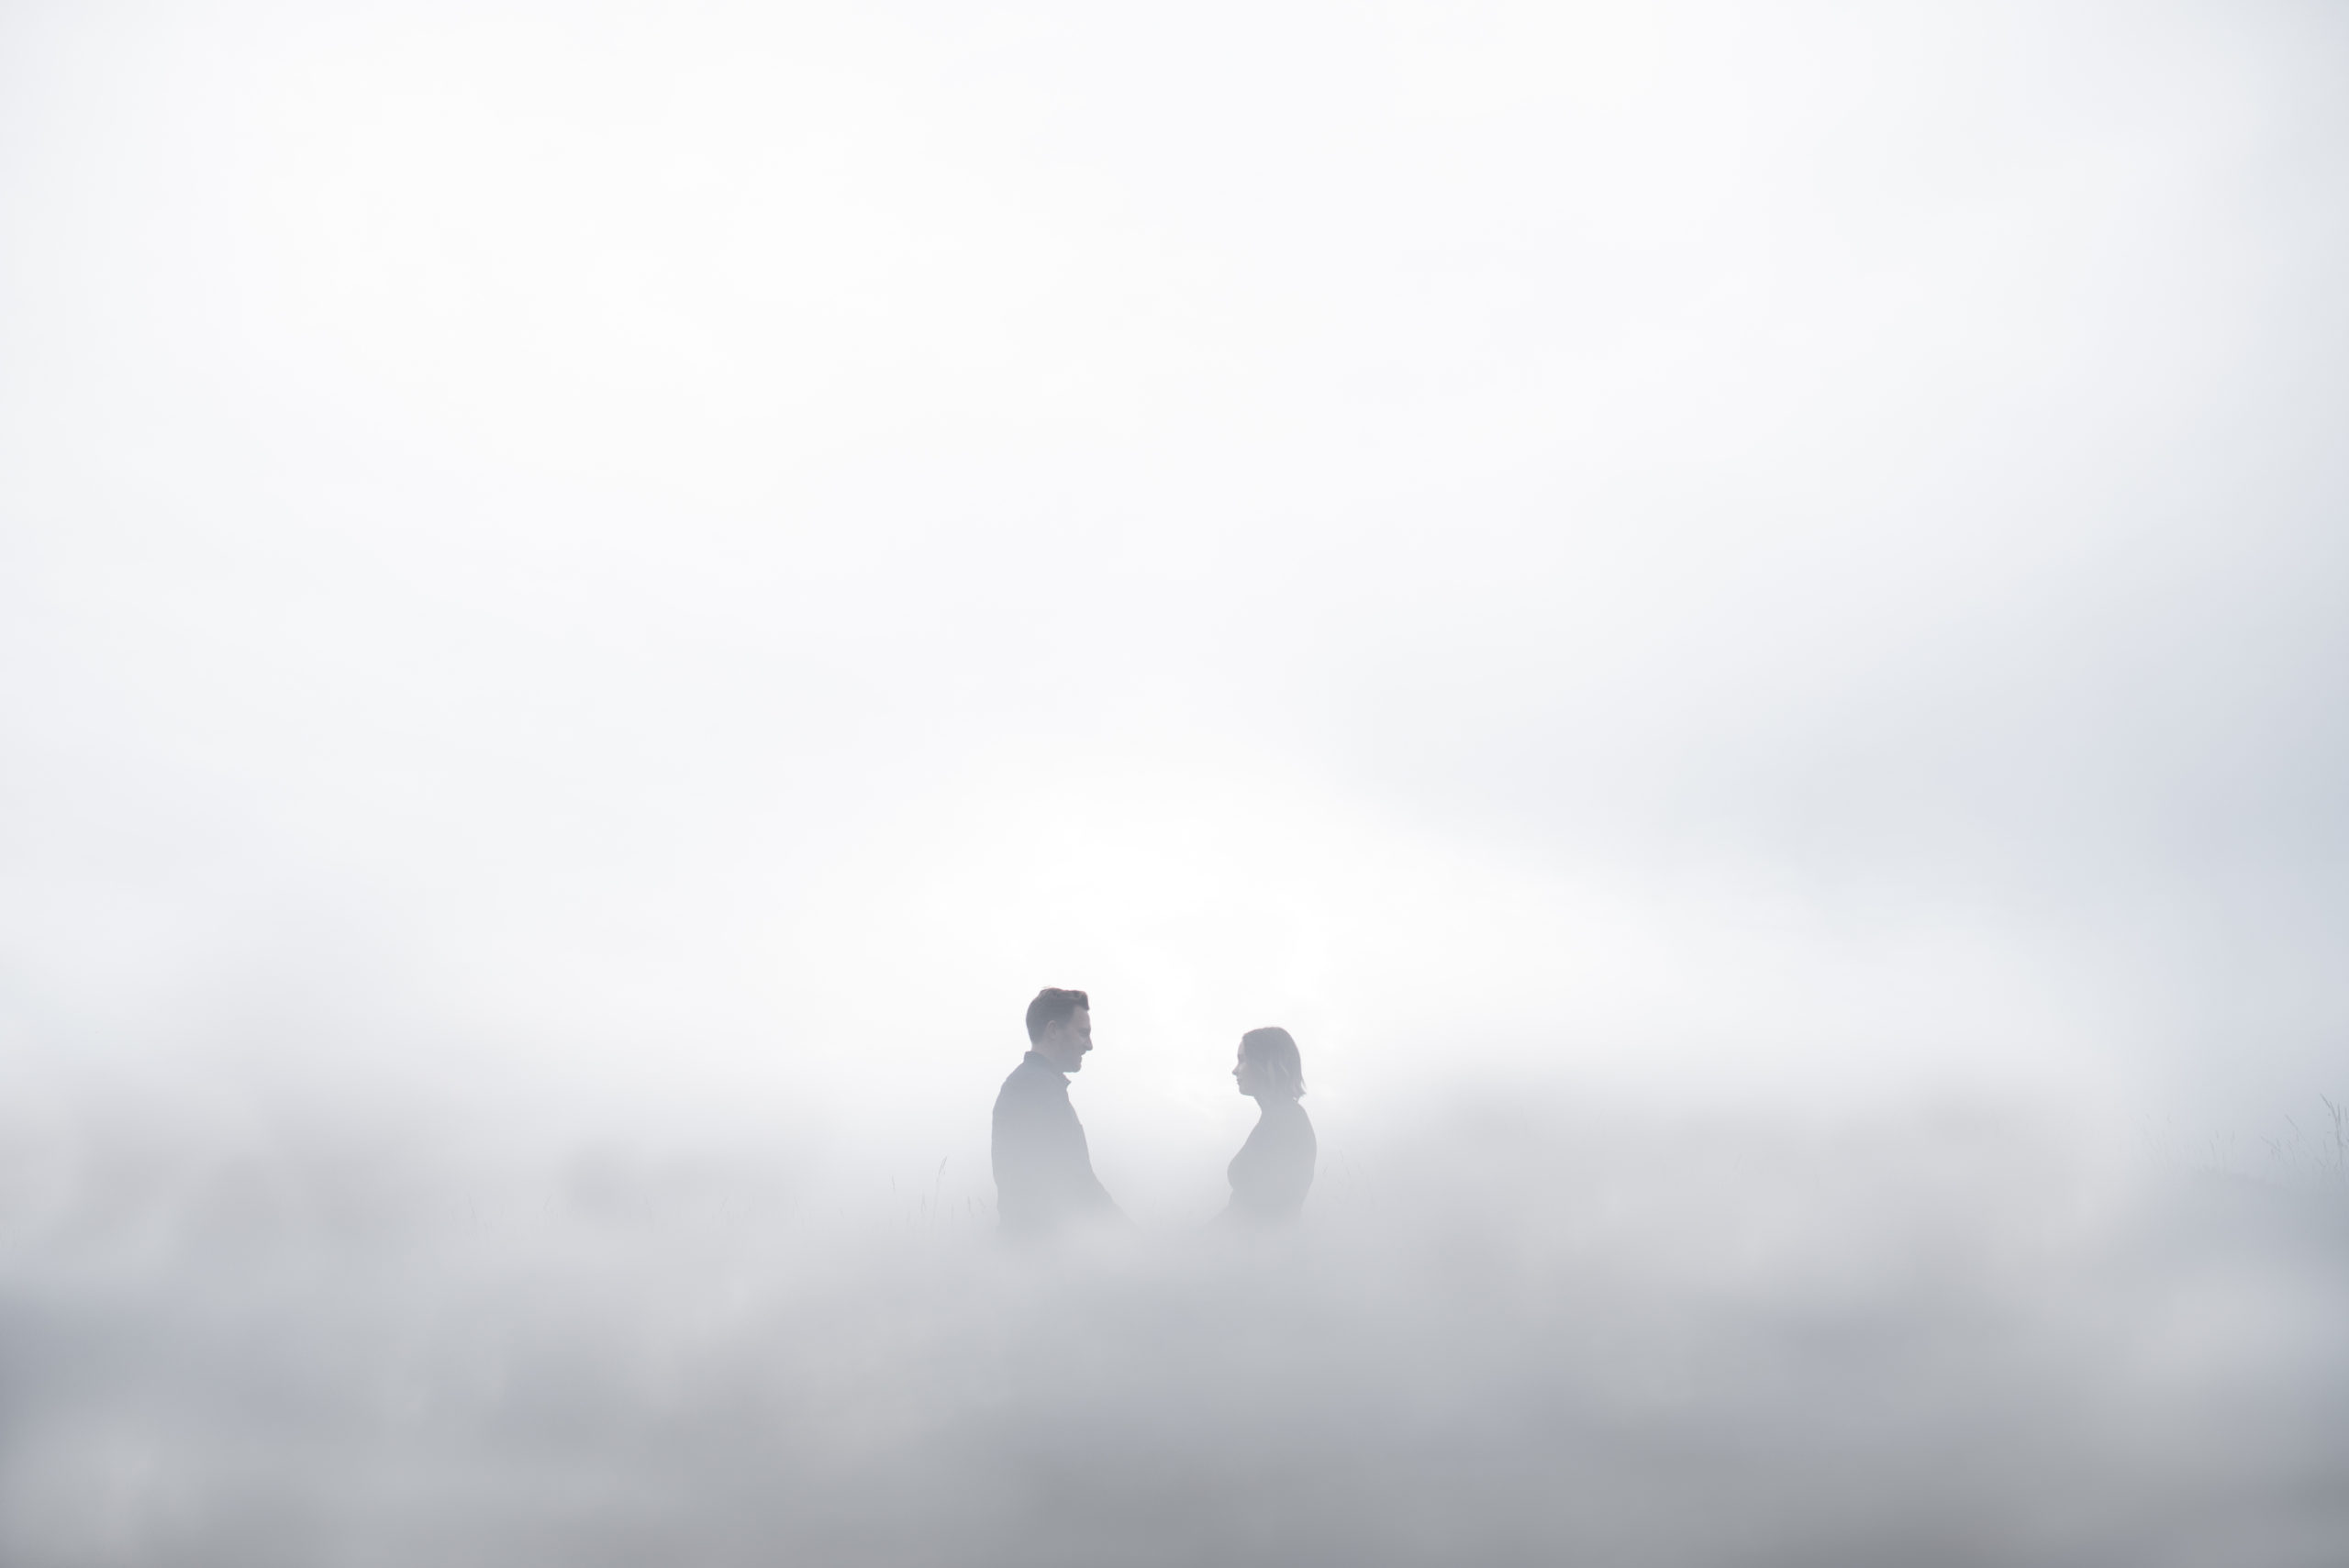 the silhouette of a couple in fog